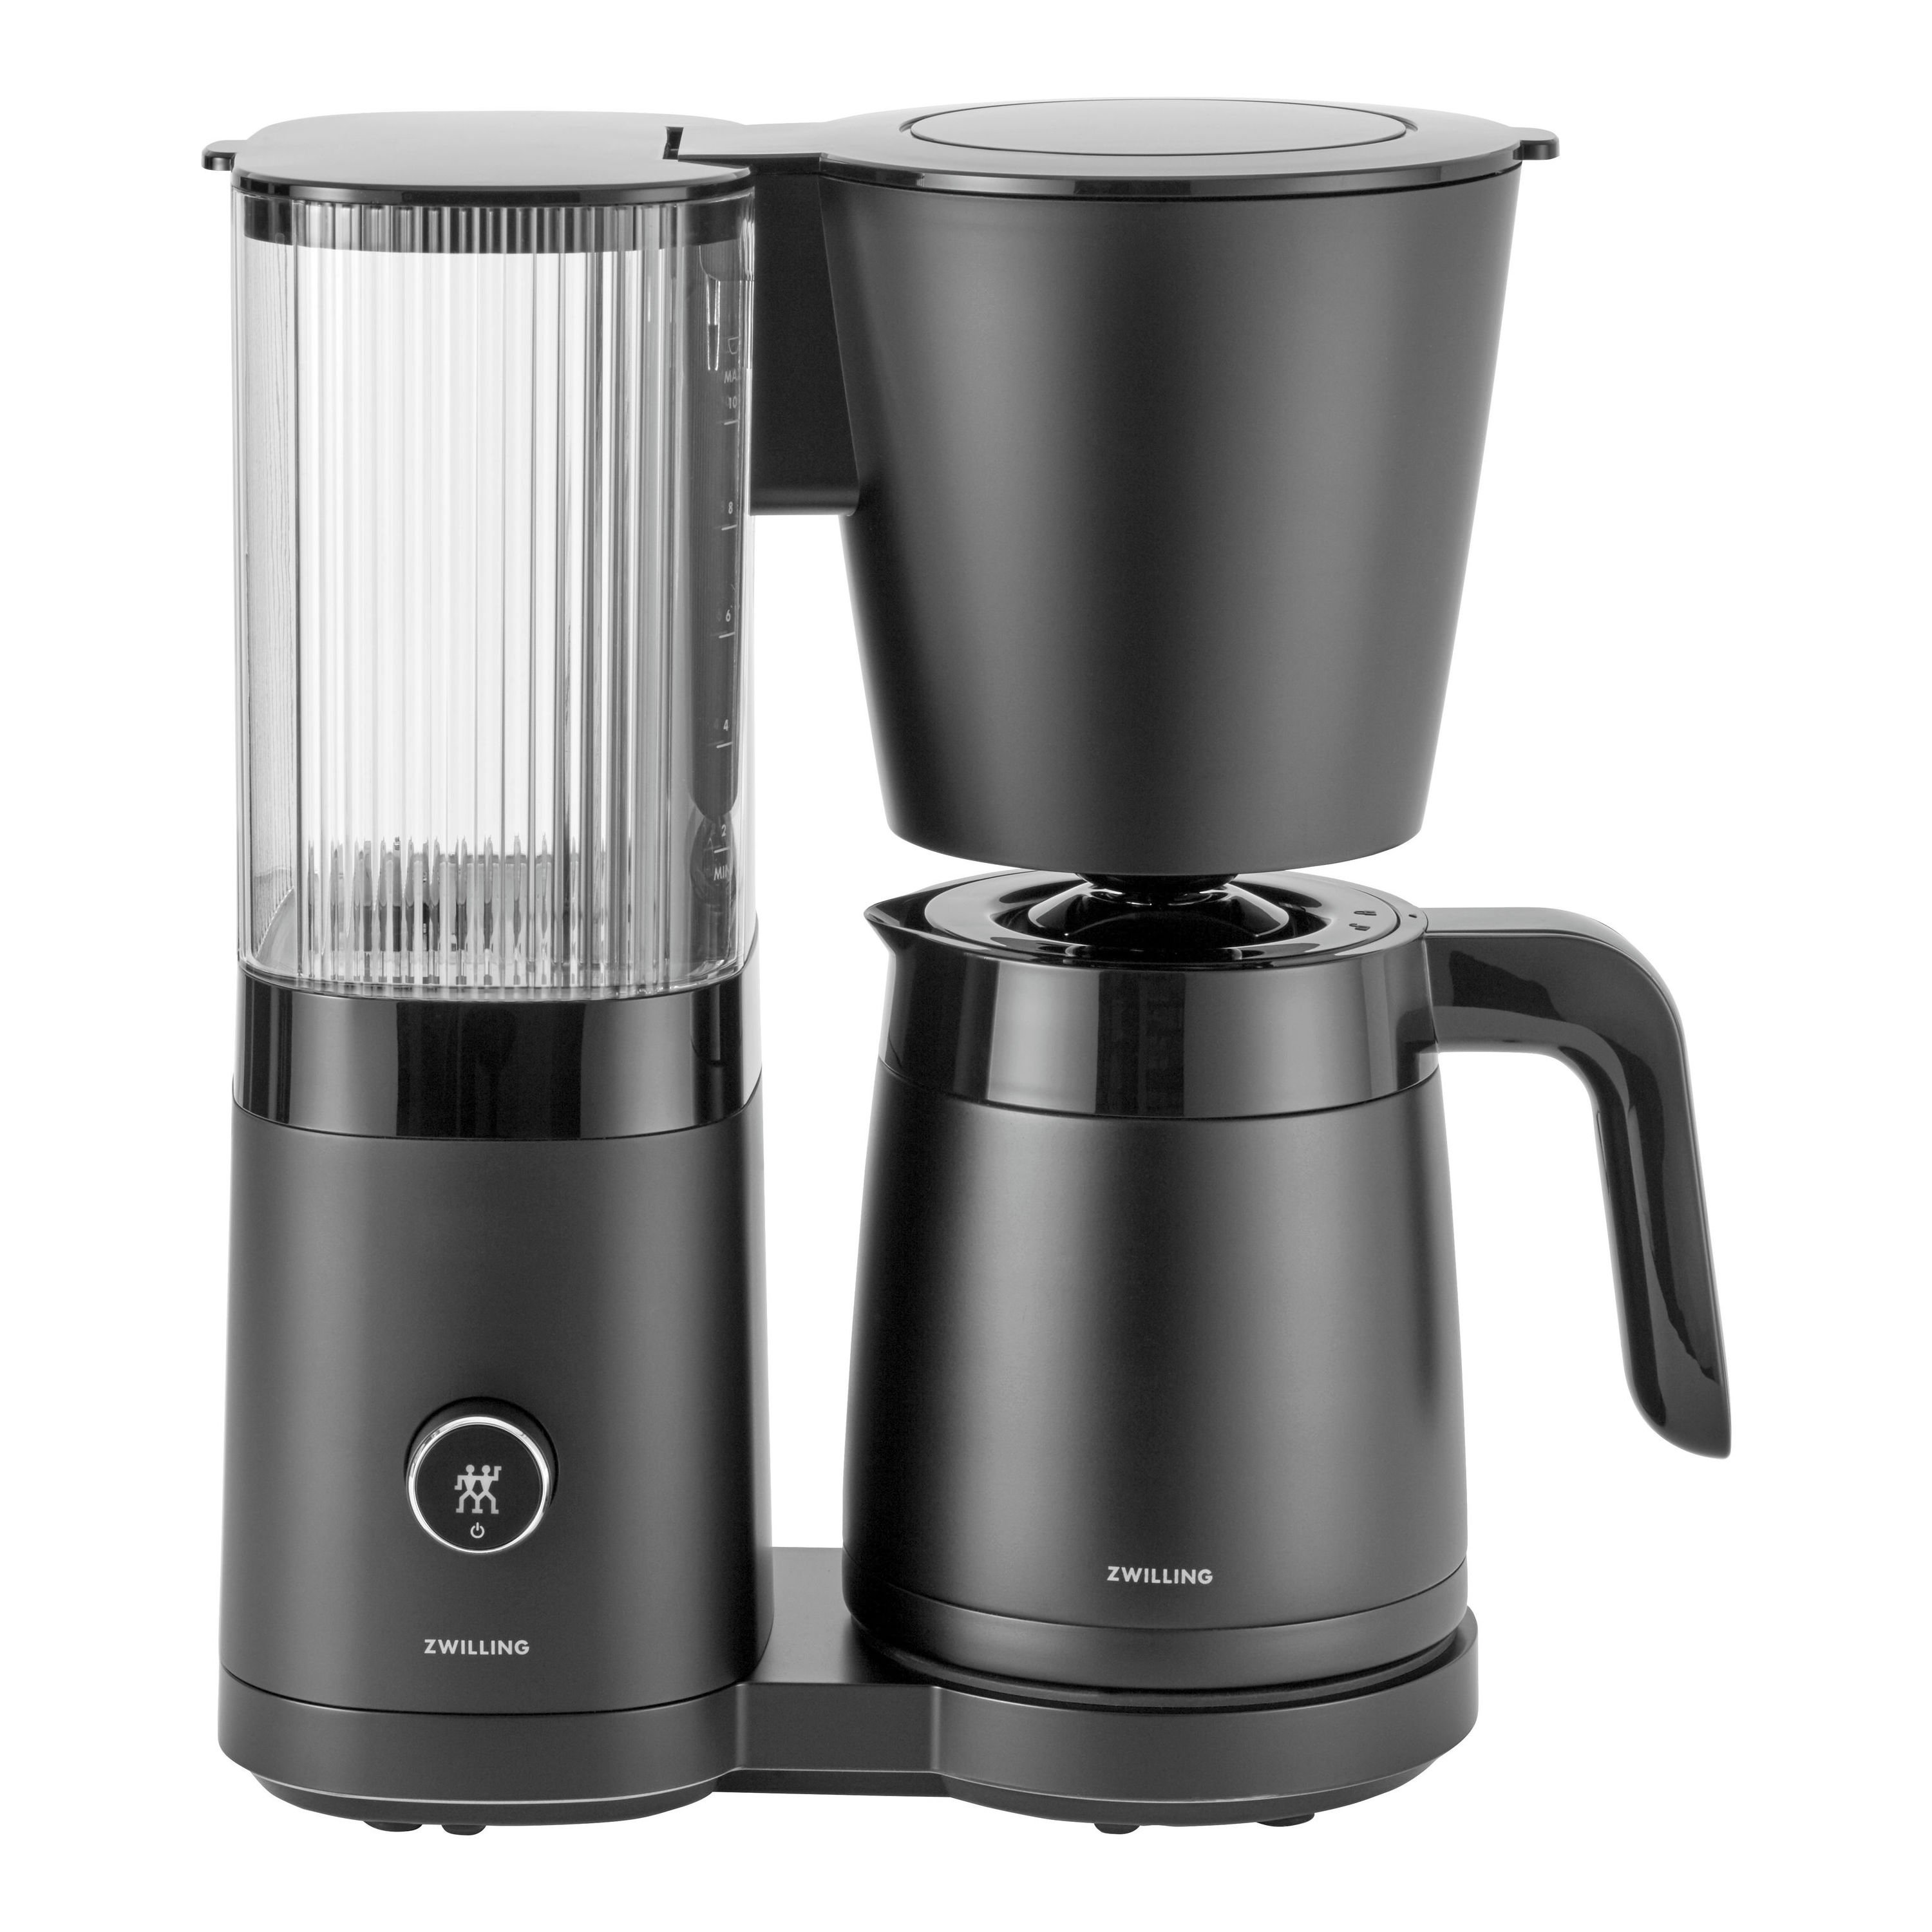 Zwilling Enfinigy Drip Coffee Maker with Thermo Carafe - Silver